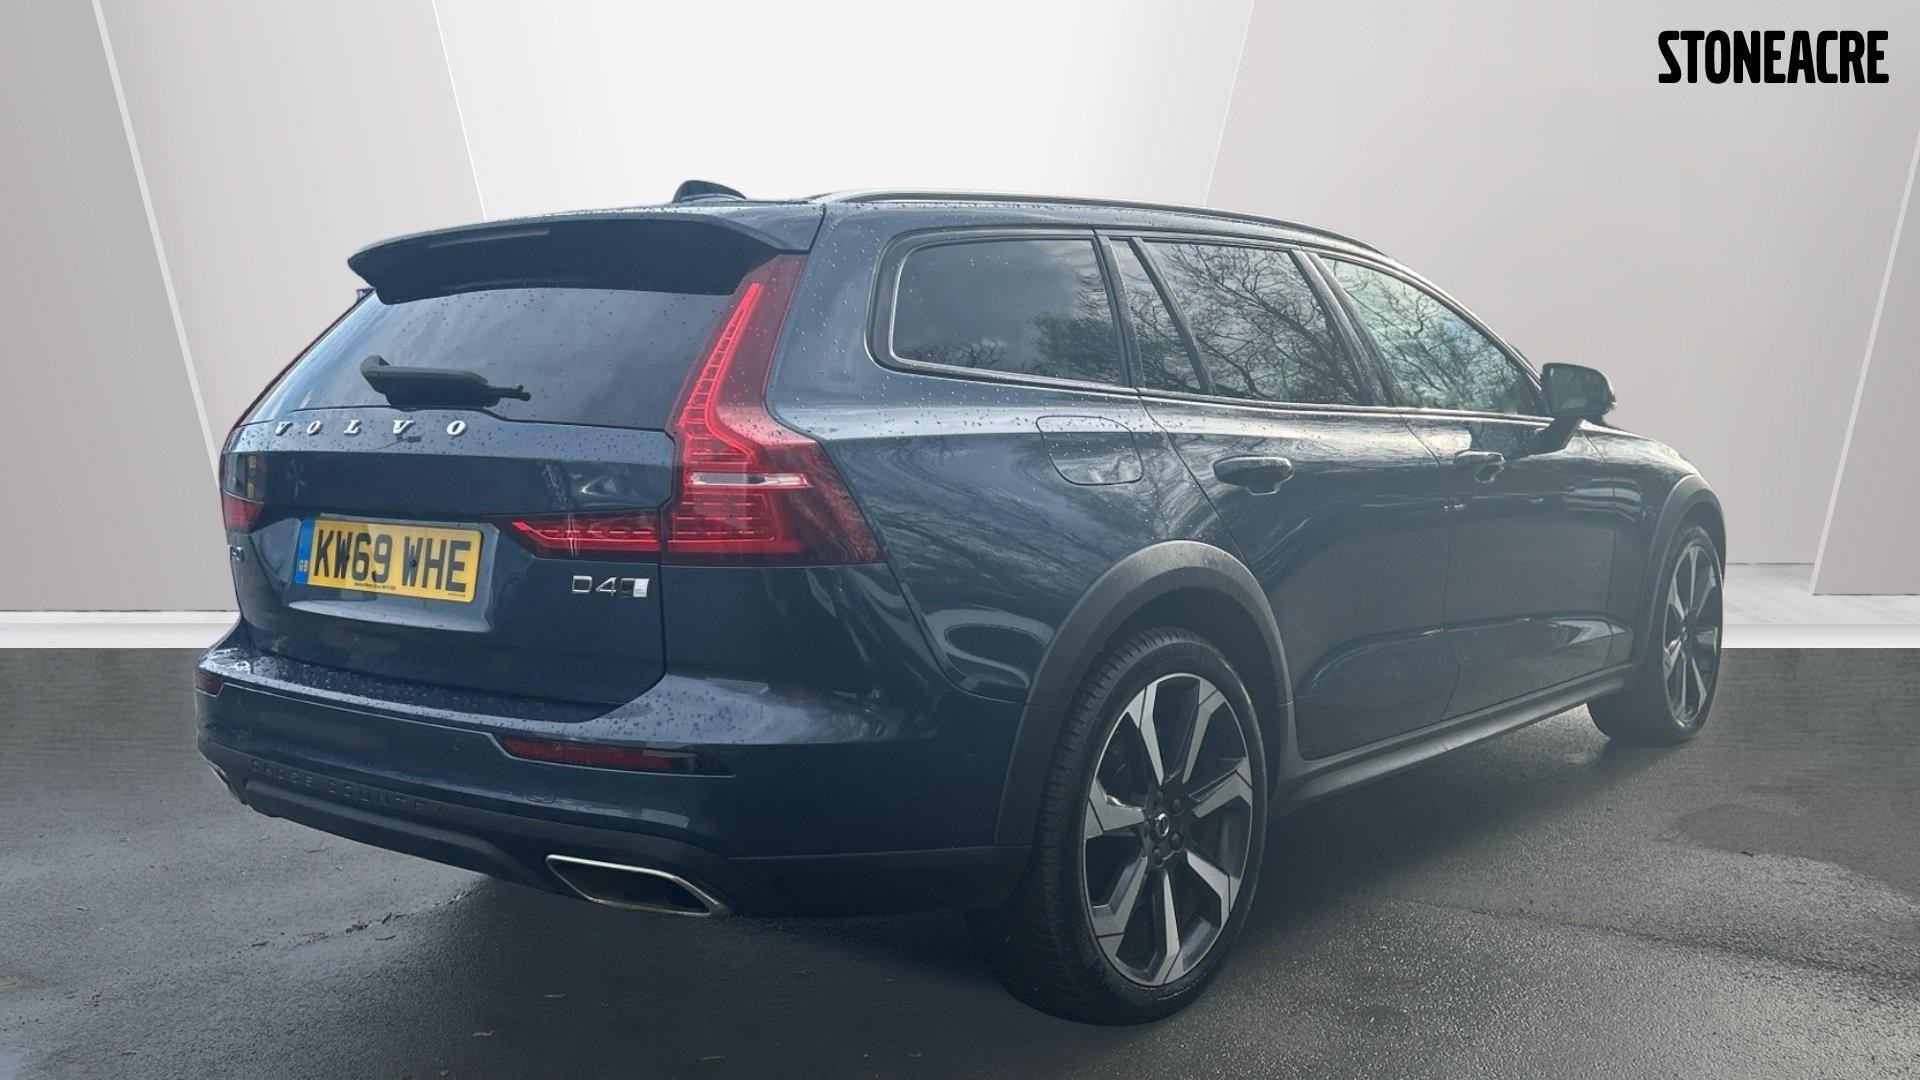 Volvo V60 Cross Country D4 AWD Plus Automatic (KW69WHE) image 6